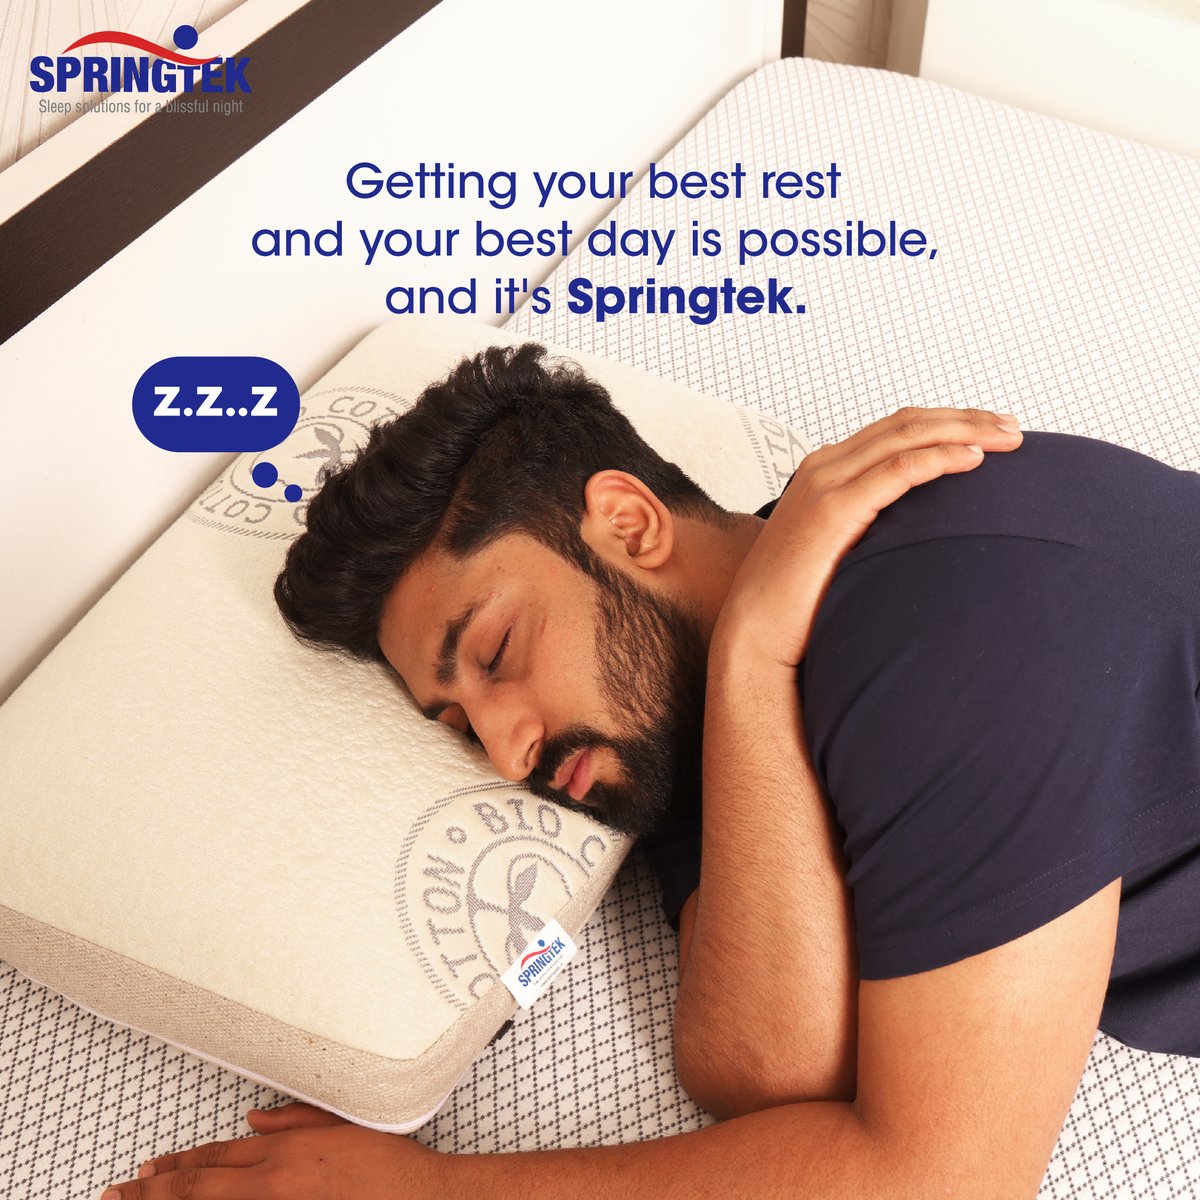 Getting your best rest and your best day is possible, and it's Springtek. 

Order Now 
springtek.in

#springtekmattress #sleepsolutions #pillow #charcoalpillow #sleepy